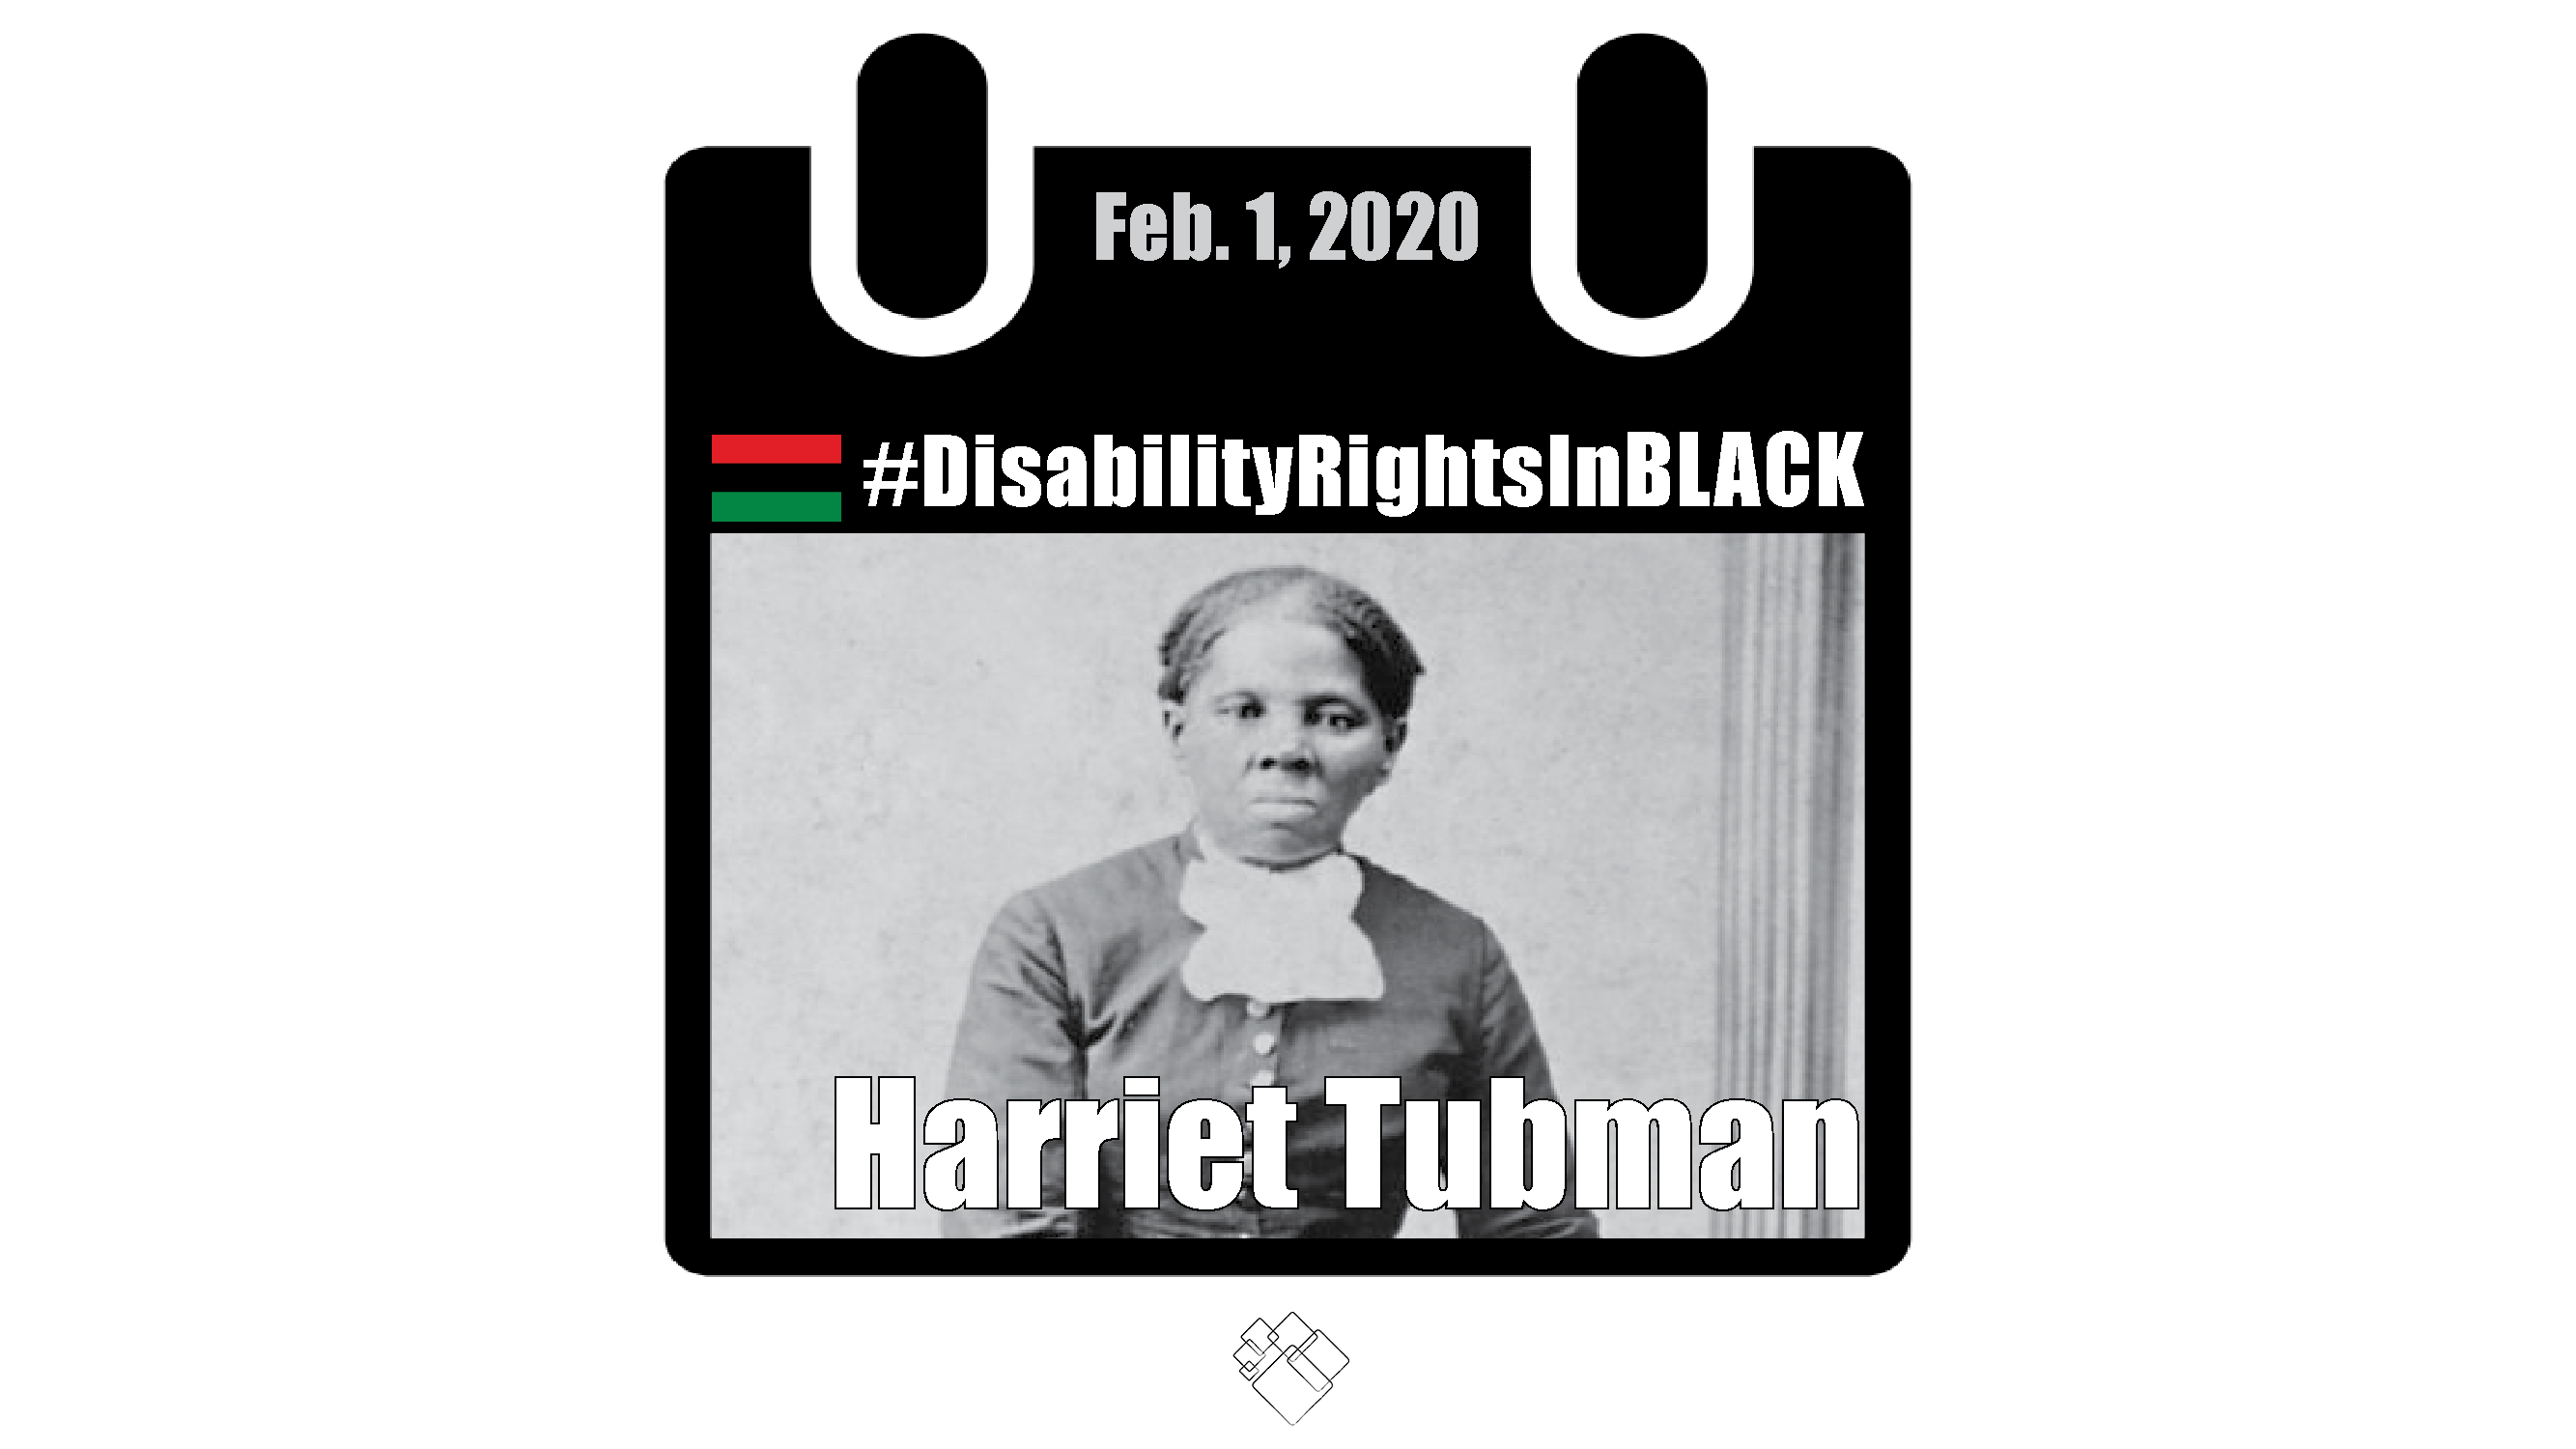 Photo of Harriet Tubman with Disability Rights in Black calendar frame